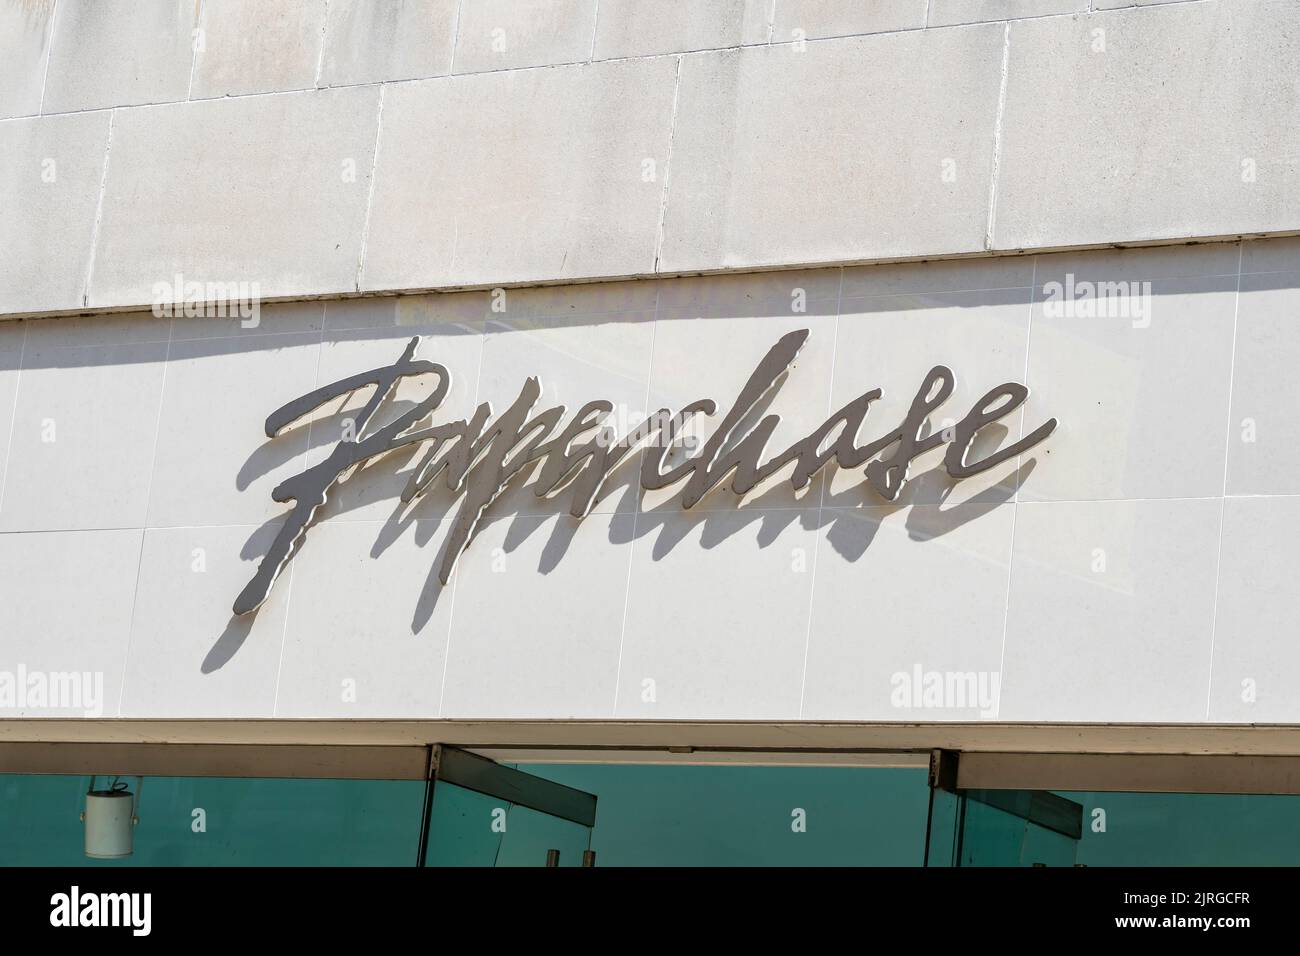 Paperchase logo and name over shop High street Lincoln city 2022 Stock Photo